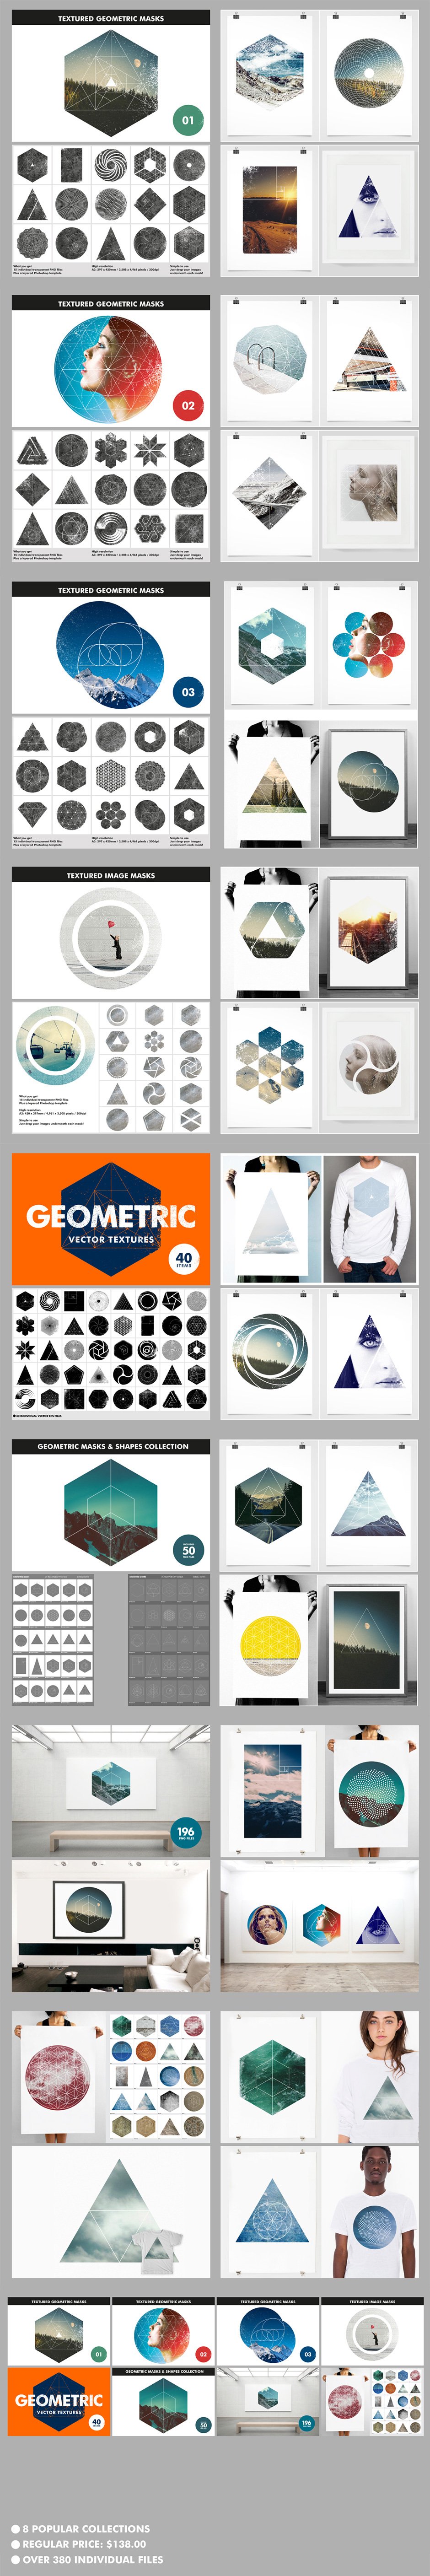 The Ultimate Geometric Collection